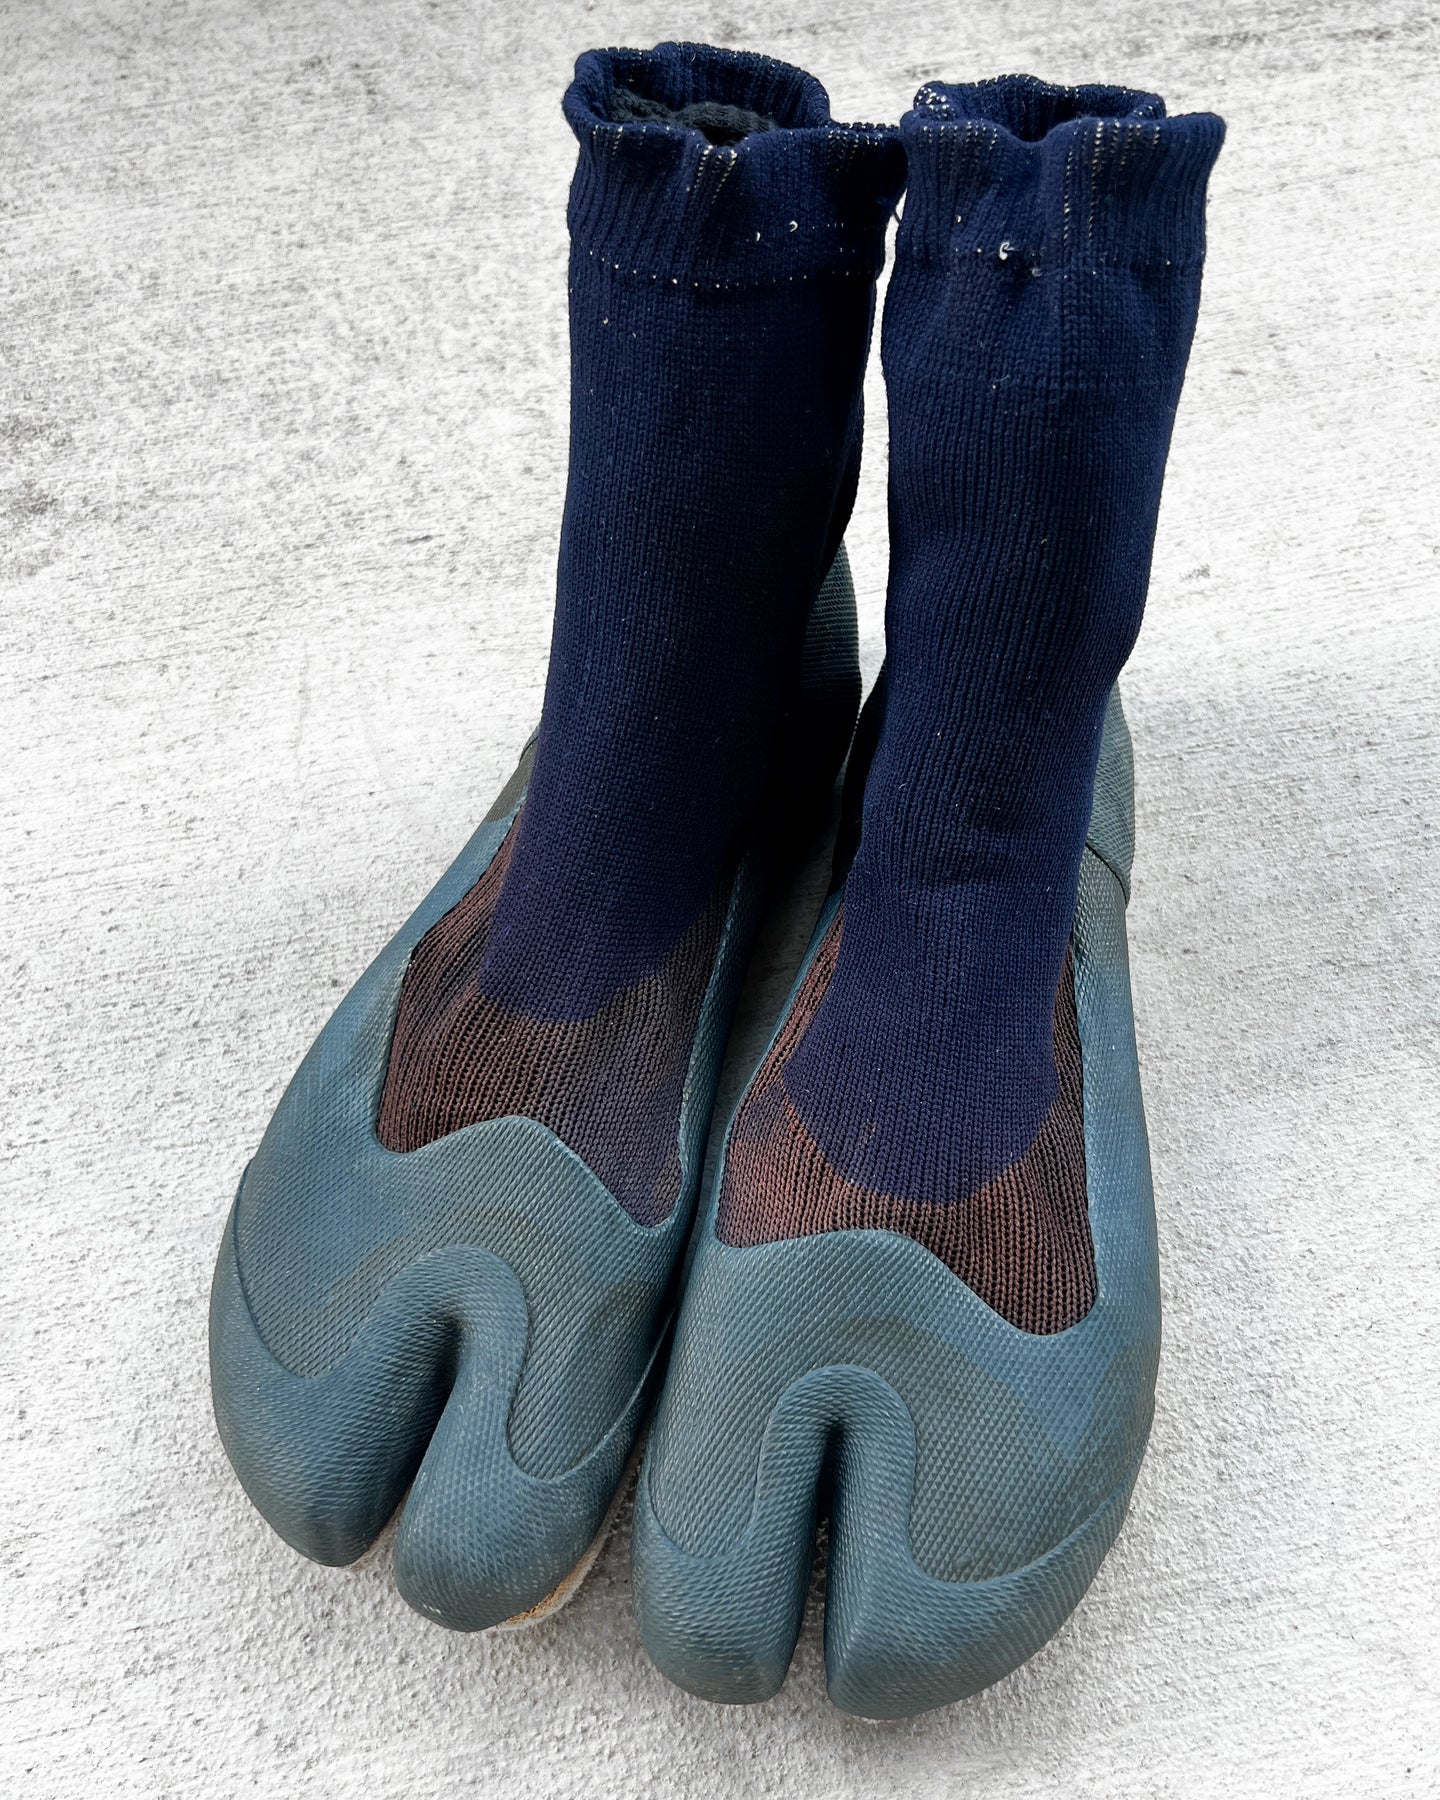 1950s Water Shoes with Split Toe - Size 11